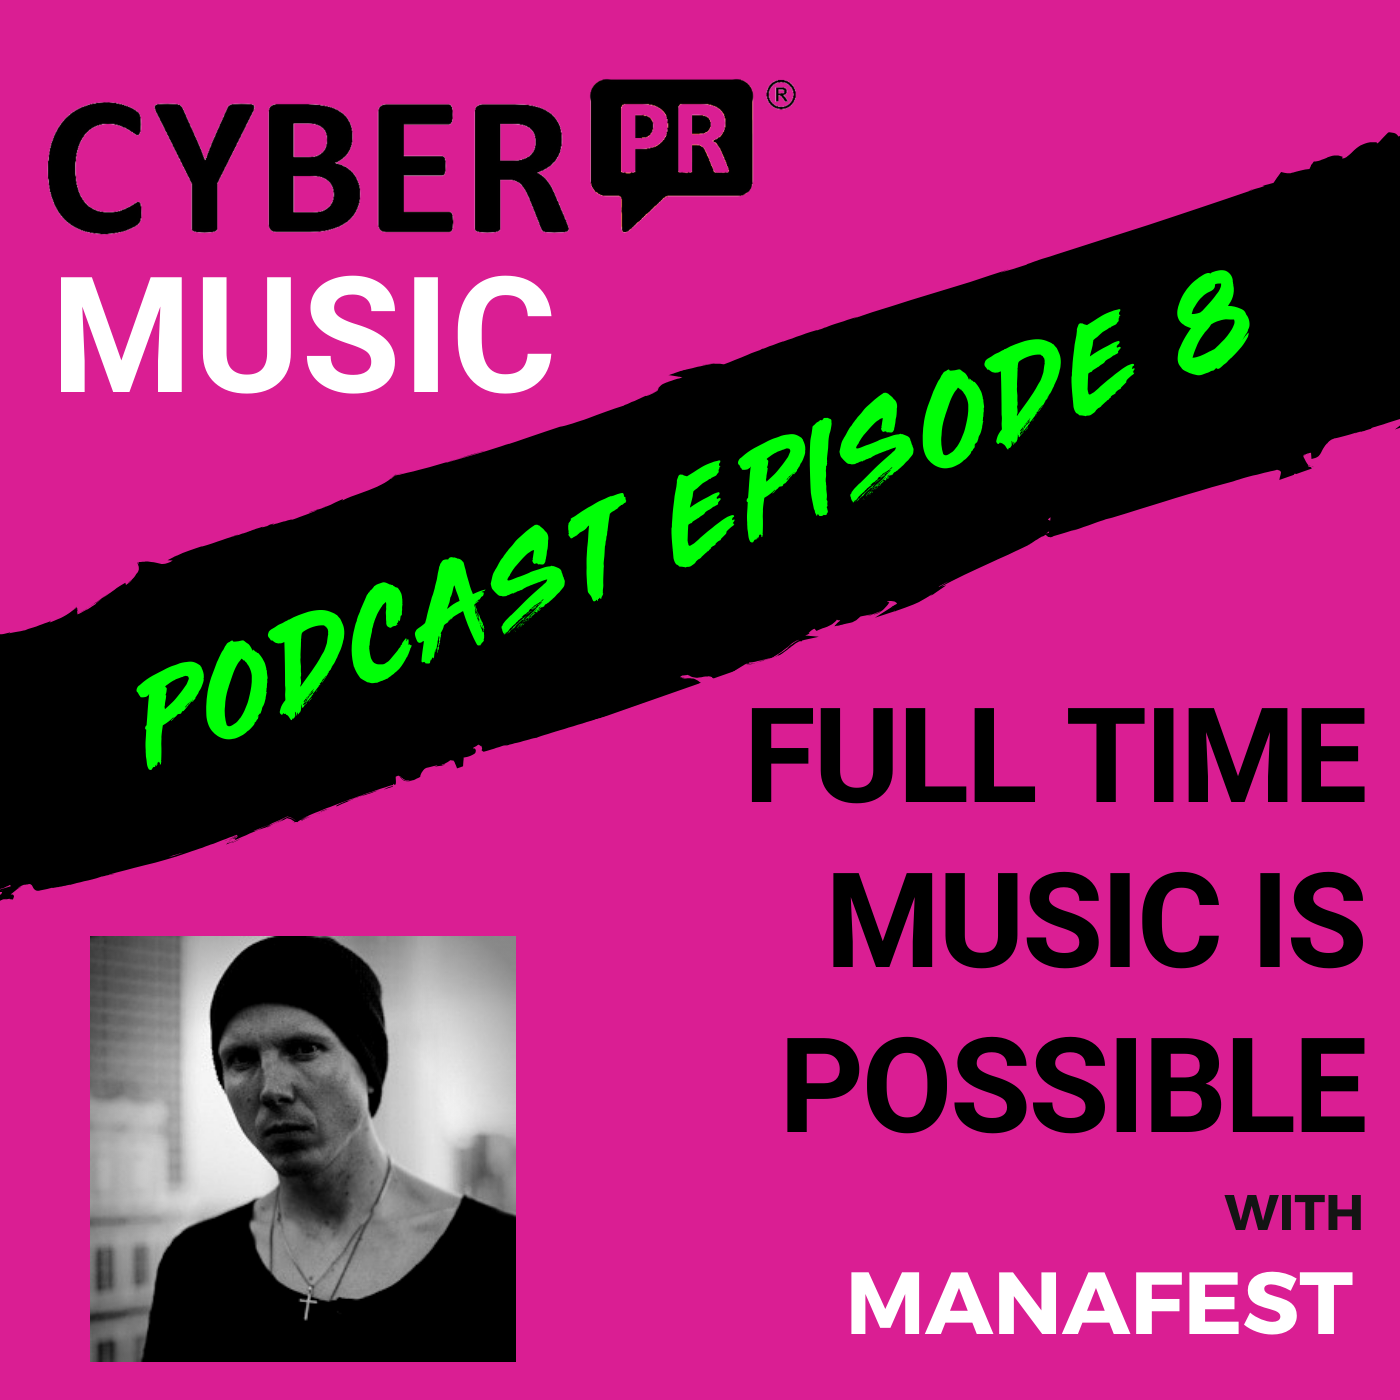 The Cyber PR Music Podcast EP 8: Full Time Music is Possible with Manafest